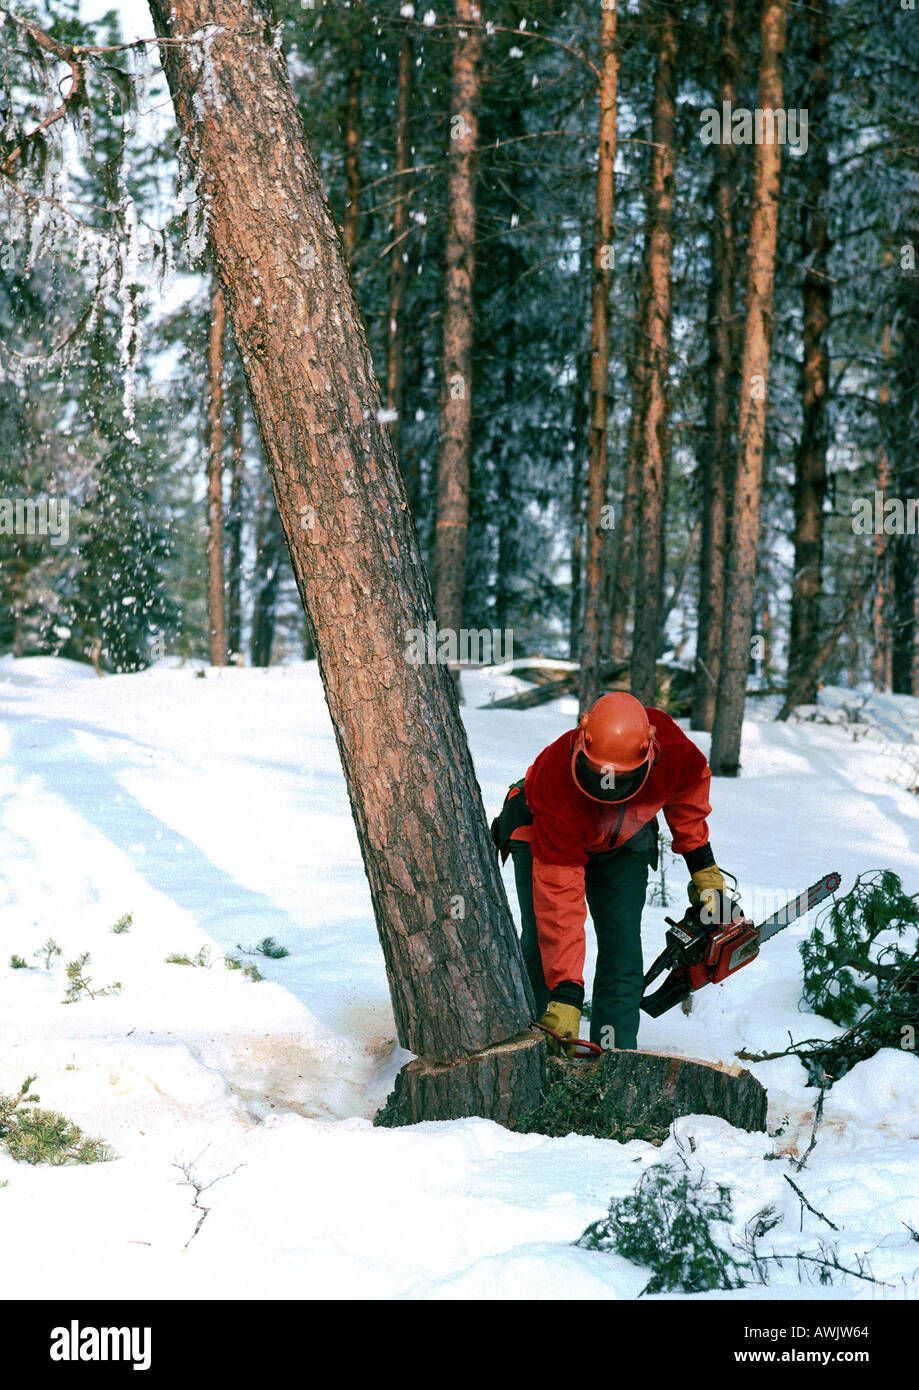 Sweden, man cutting down tree with chain saw in snow Stock Photo